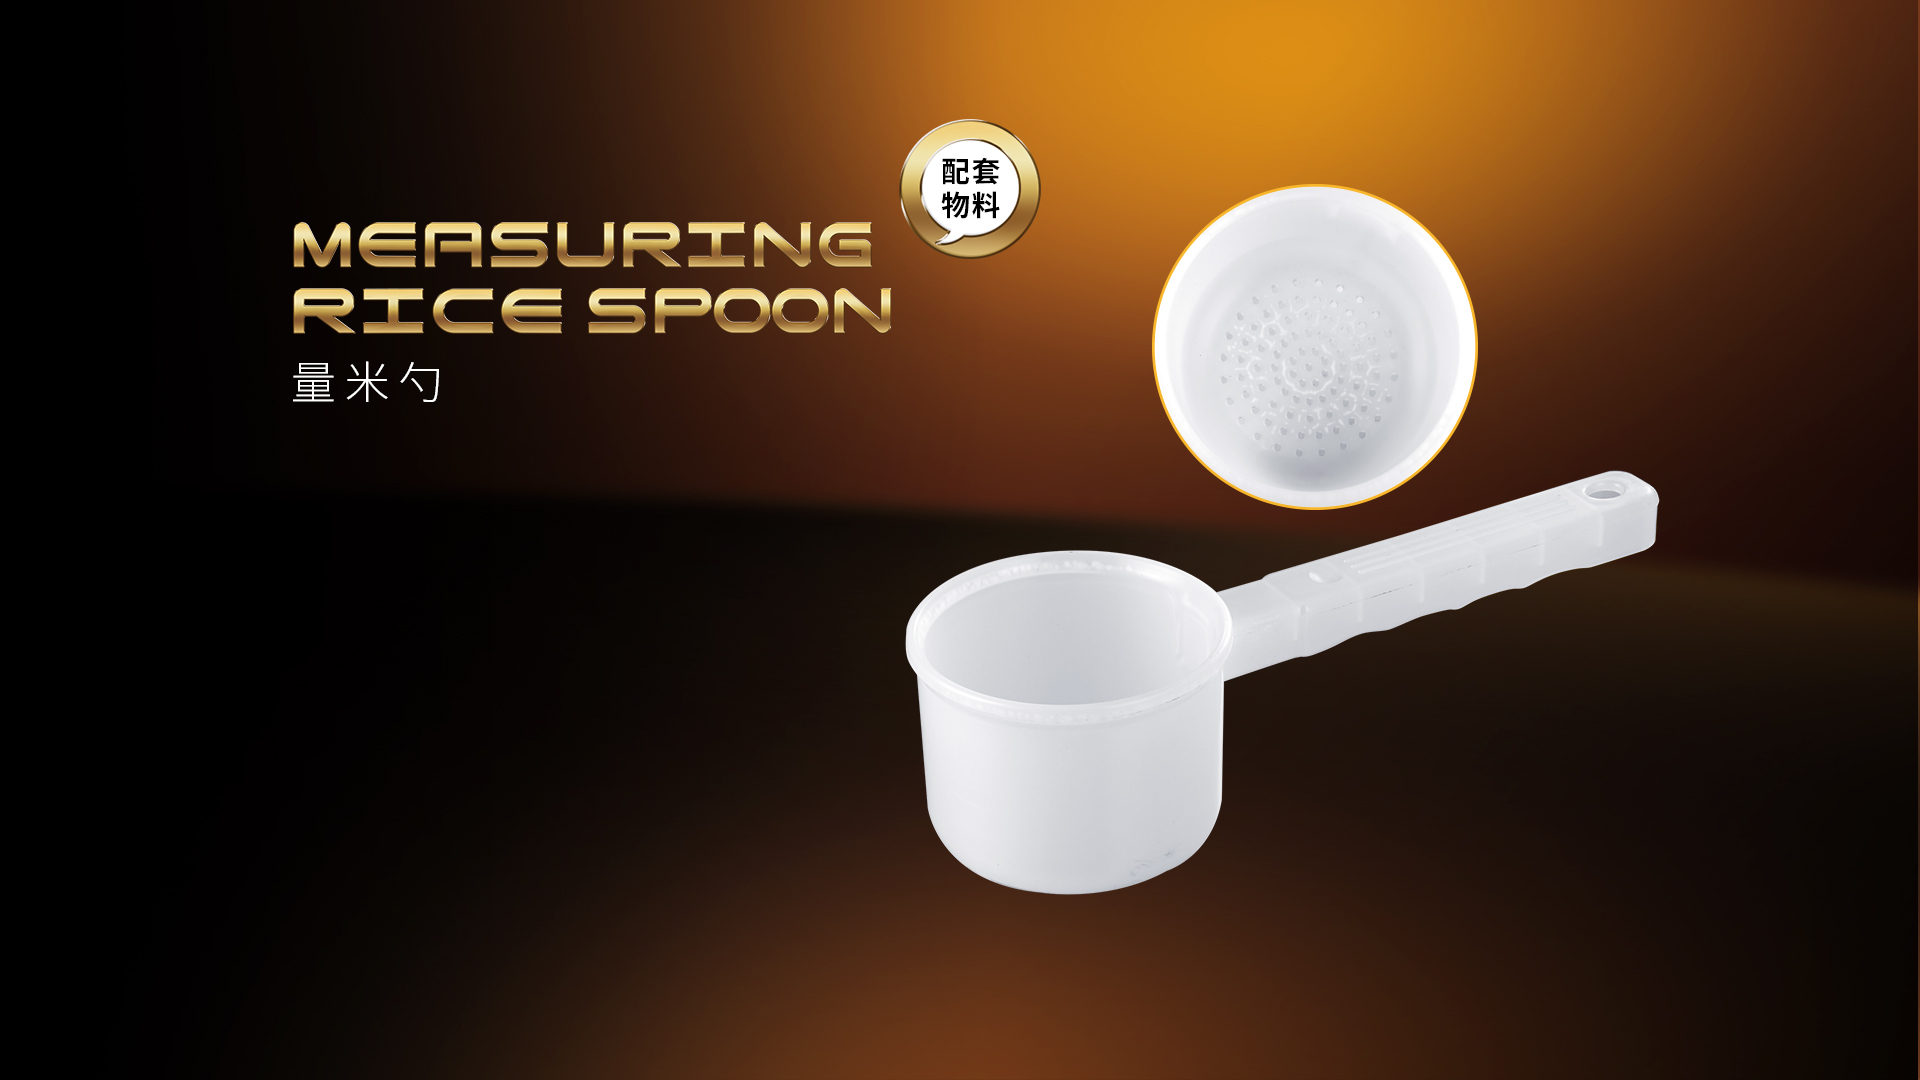 zhenghuibao_supporing_measuring_rice_spoon_details_page.jpg